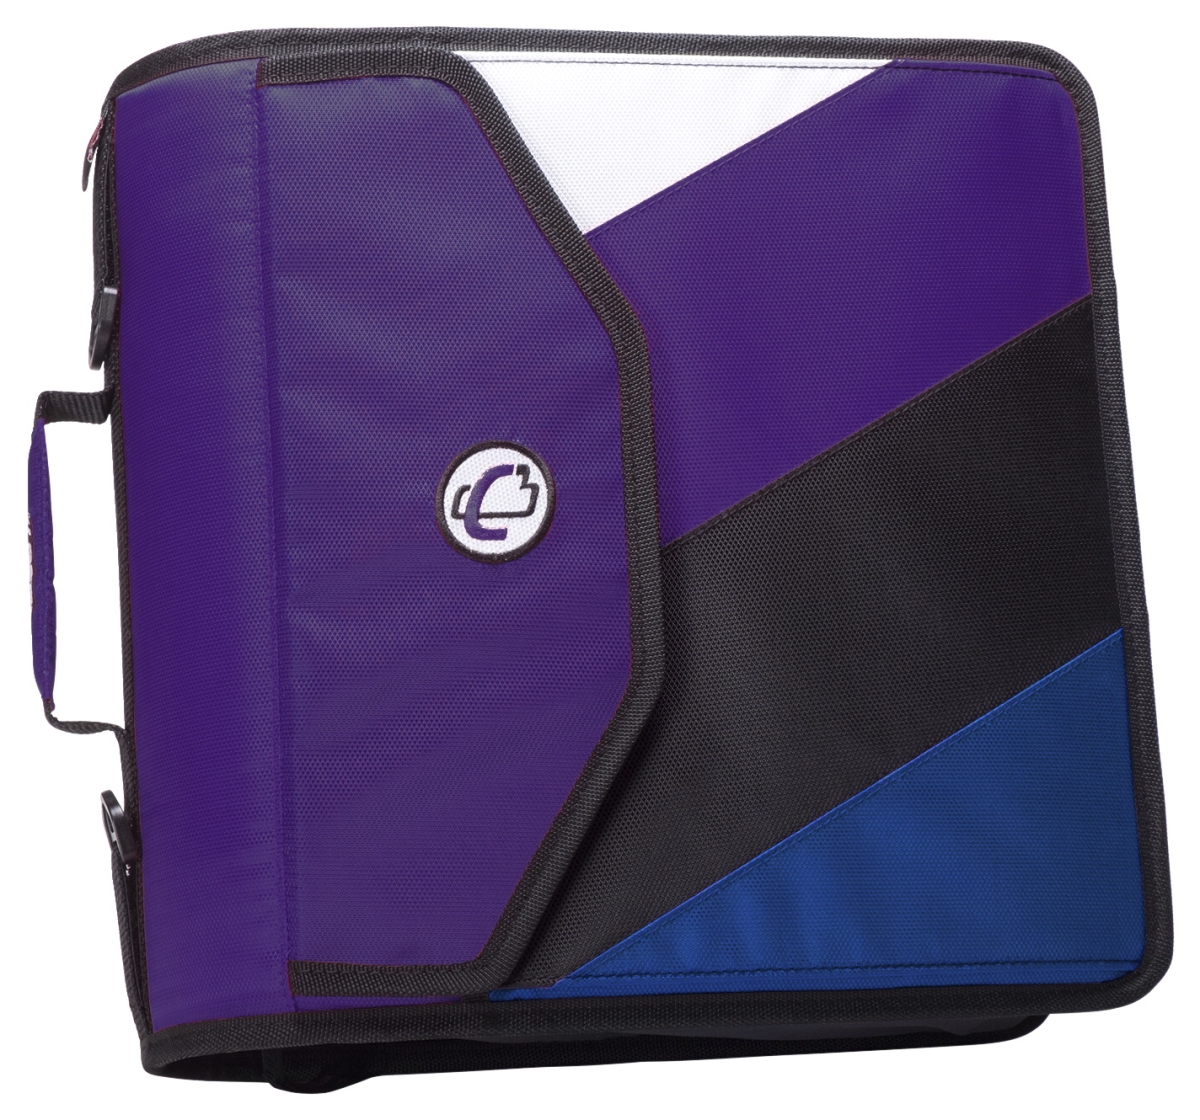 2006789 4 In. The King Sized Zip Tab Backpack Zipper Binder With D-ring, Purple